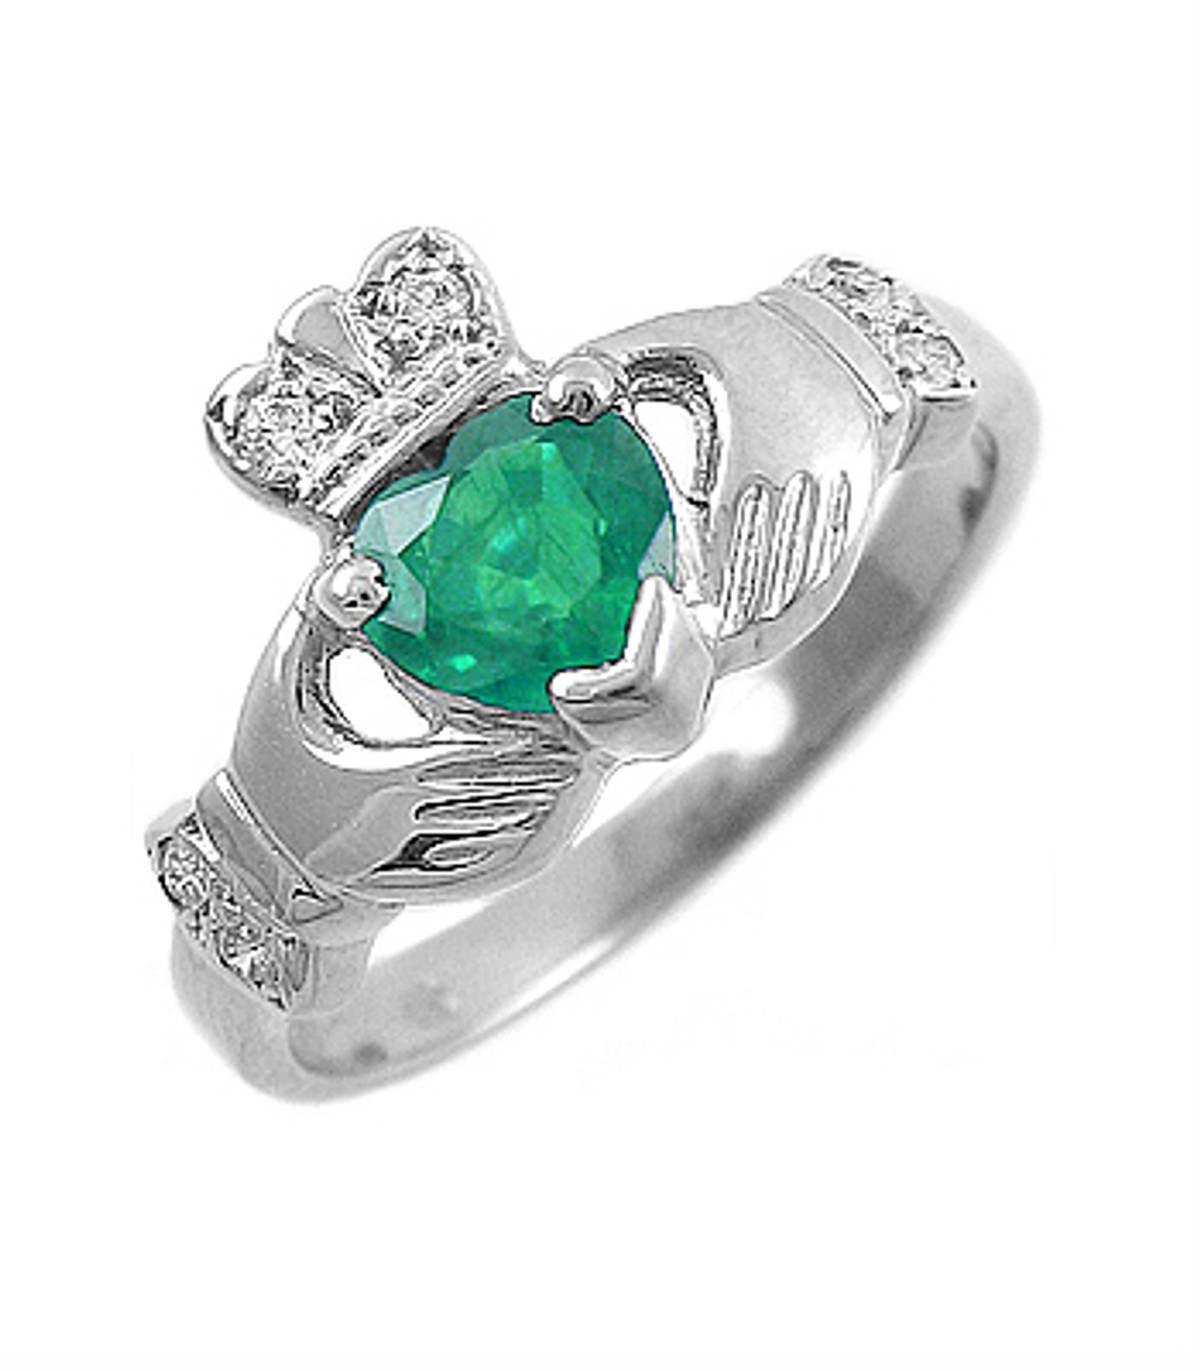 Beautiful&nbsp;Irish made&nbsp;CL400A-22 14 carat white gold 0.55cts emerald/0.06cts diamonds Claddagh Engagement ring